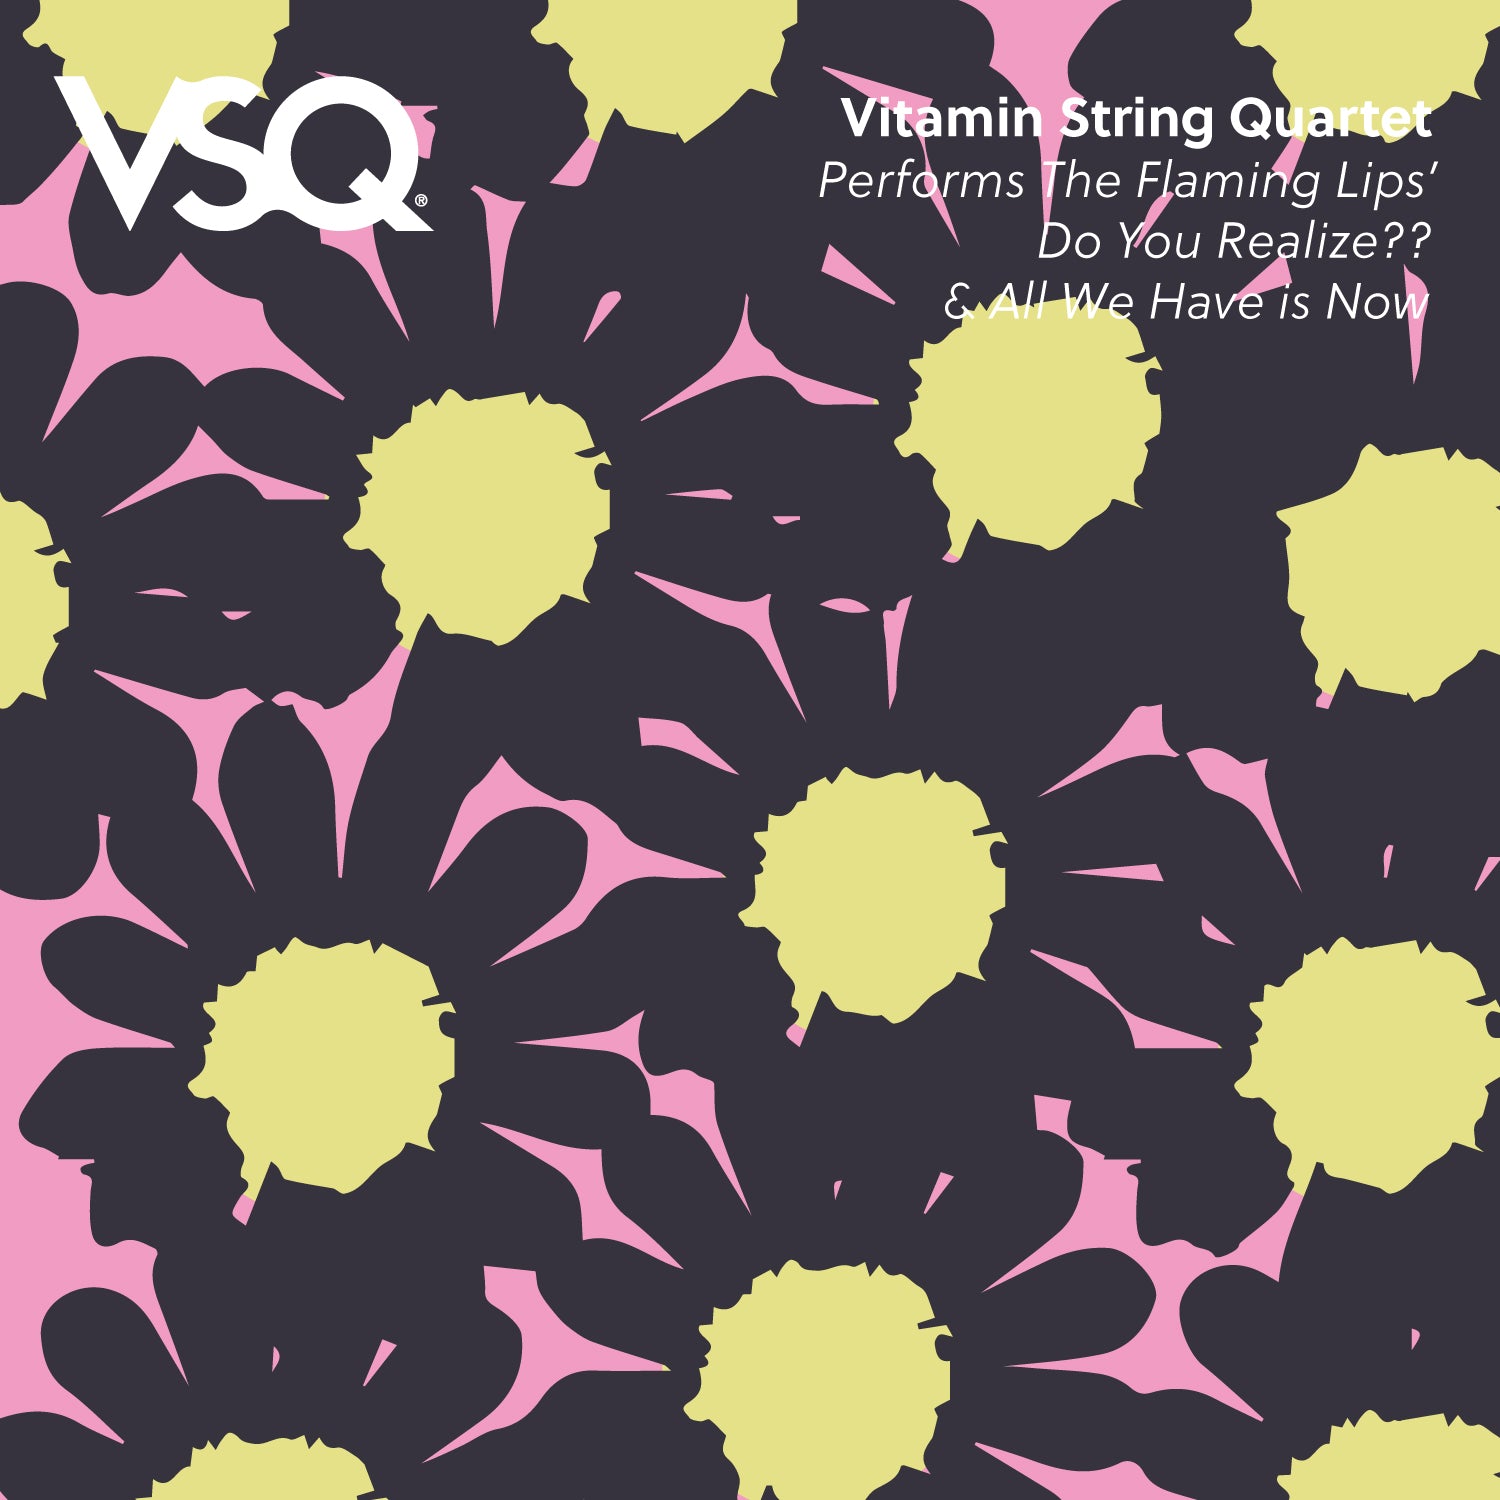 Vitamin String Quartet Performs The Flaming Lips' "Do You Realize" and "All We Have is Now" - 7" Vinyl